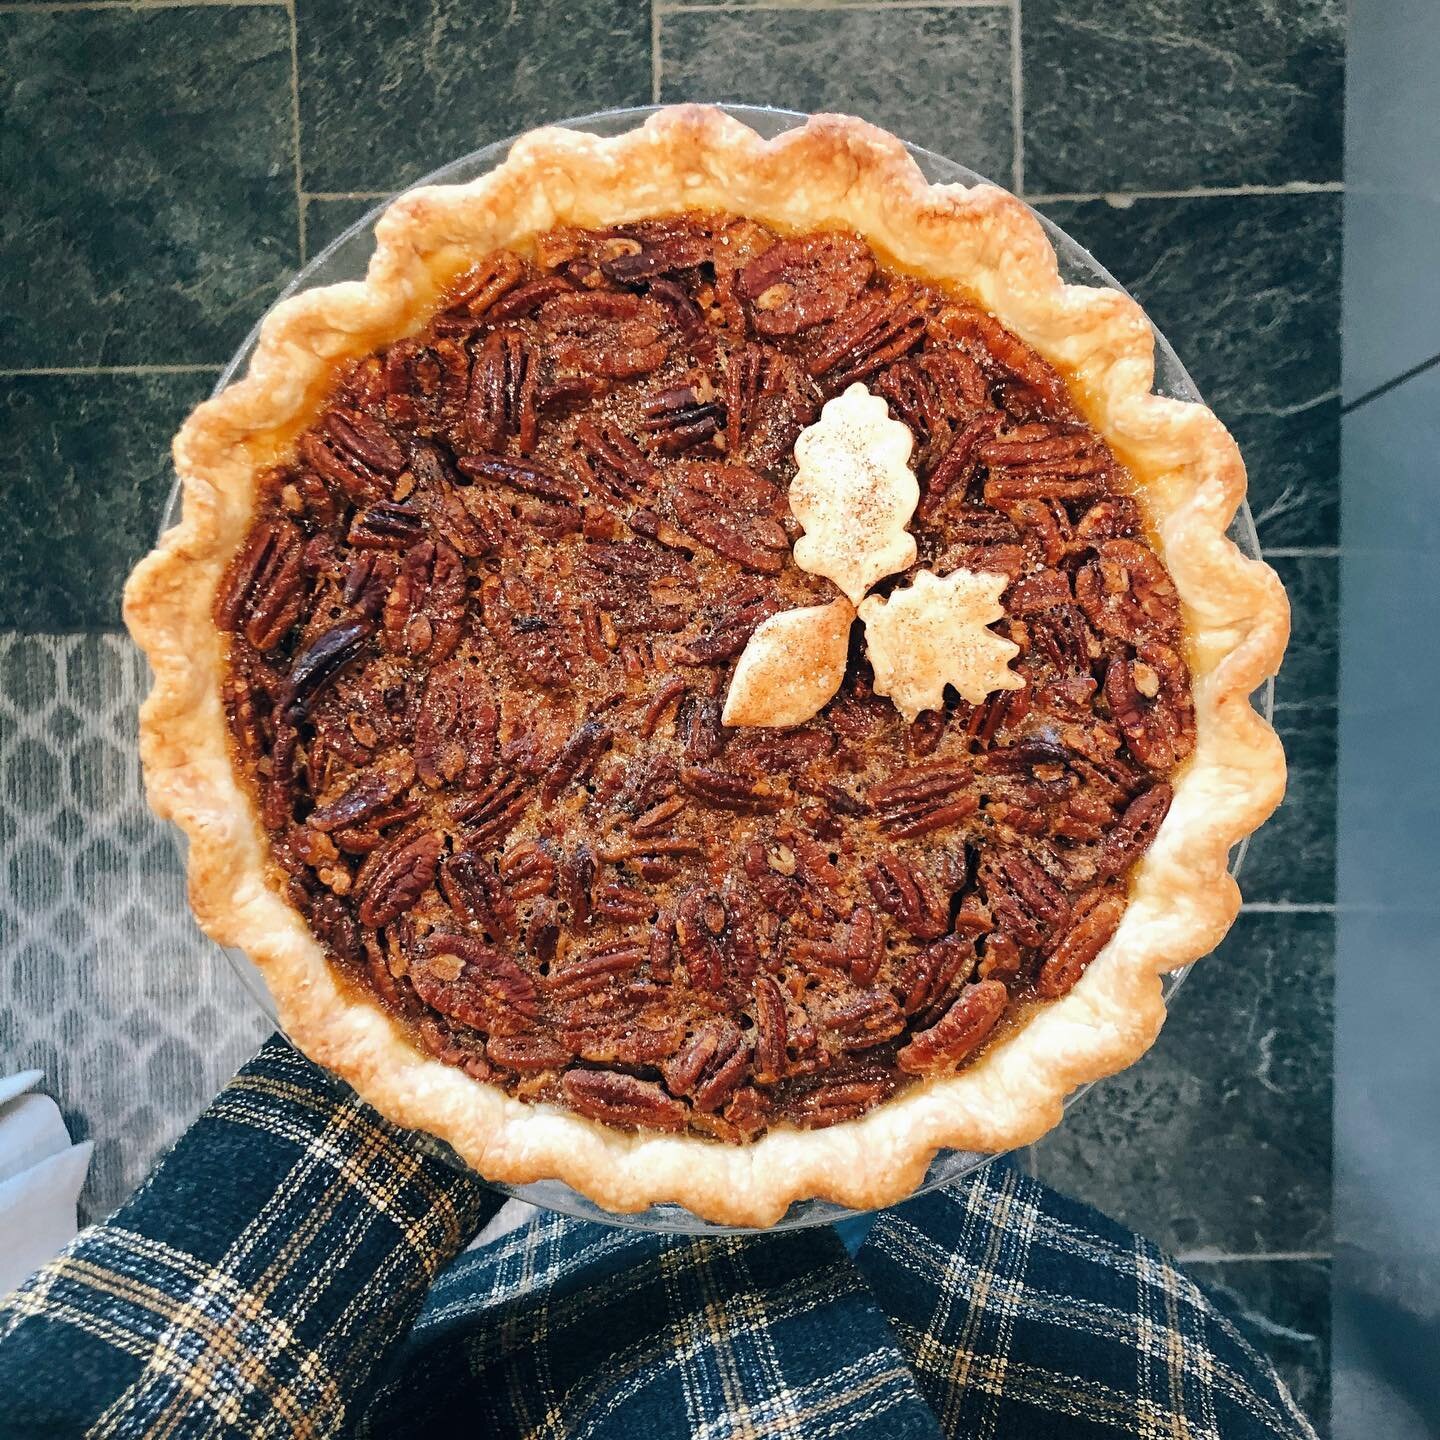 Turns out I&rsquo;m a huge control freak with my pies and made @peter___shaw do a test run pecan pie last night and told him I&rsquo;d make my pie crust for him before turning him loose on his families thanksgiving or he has to FaceTime me while he m